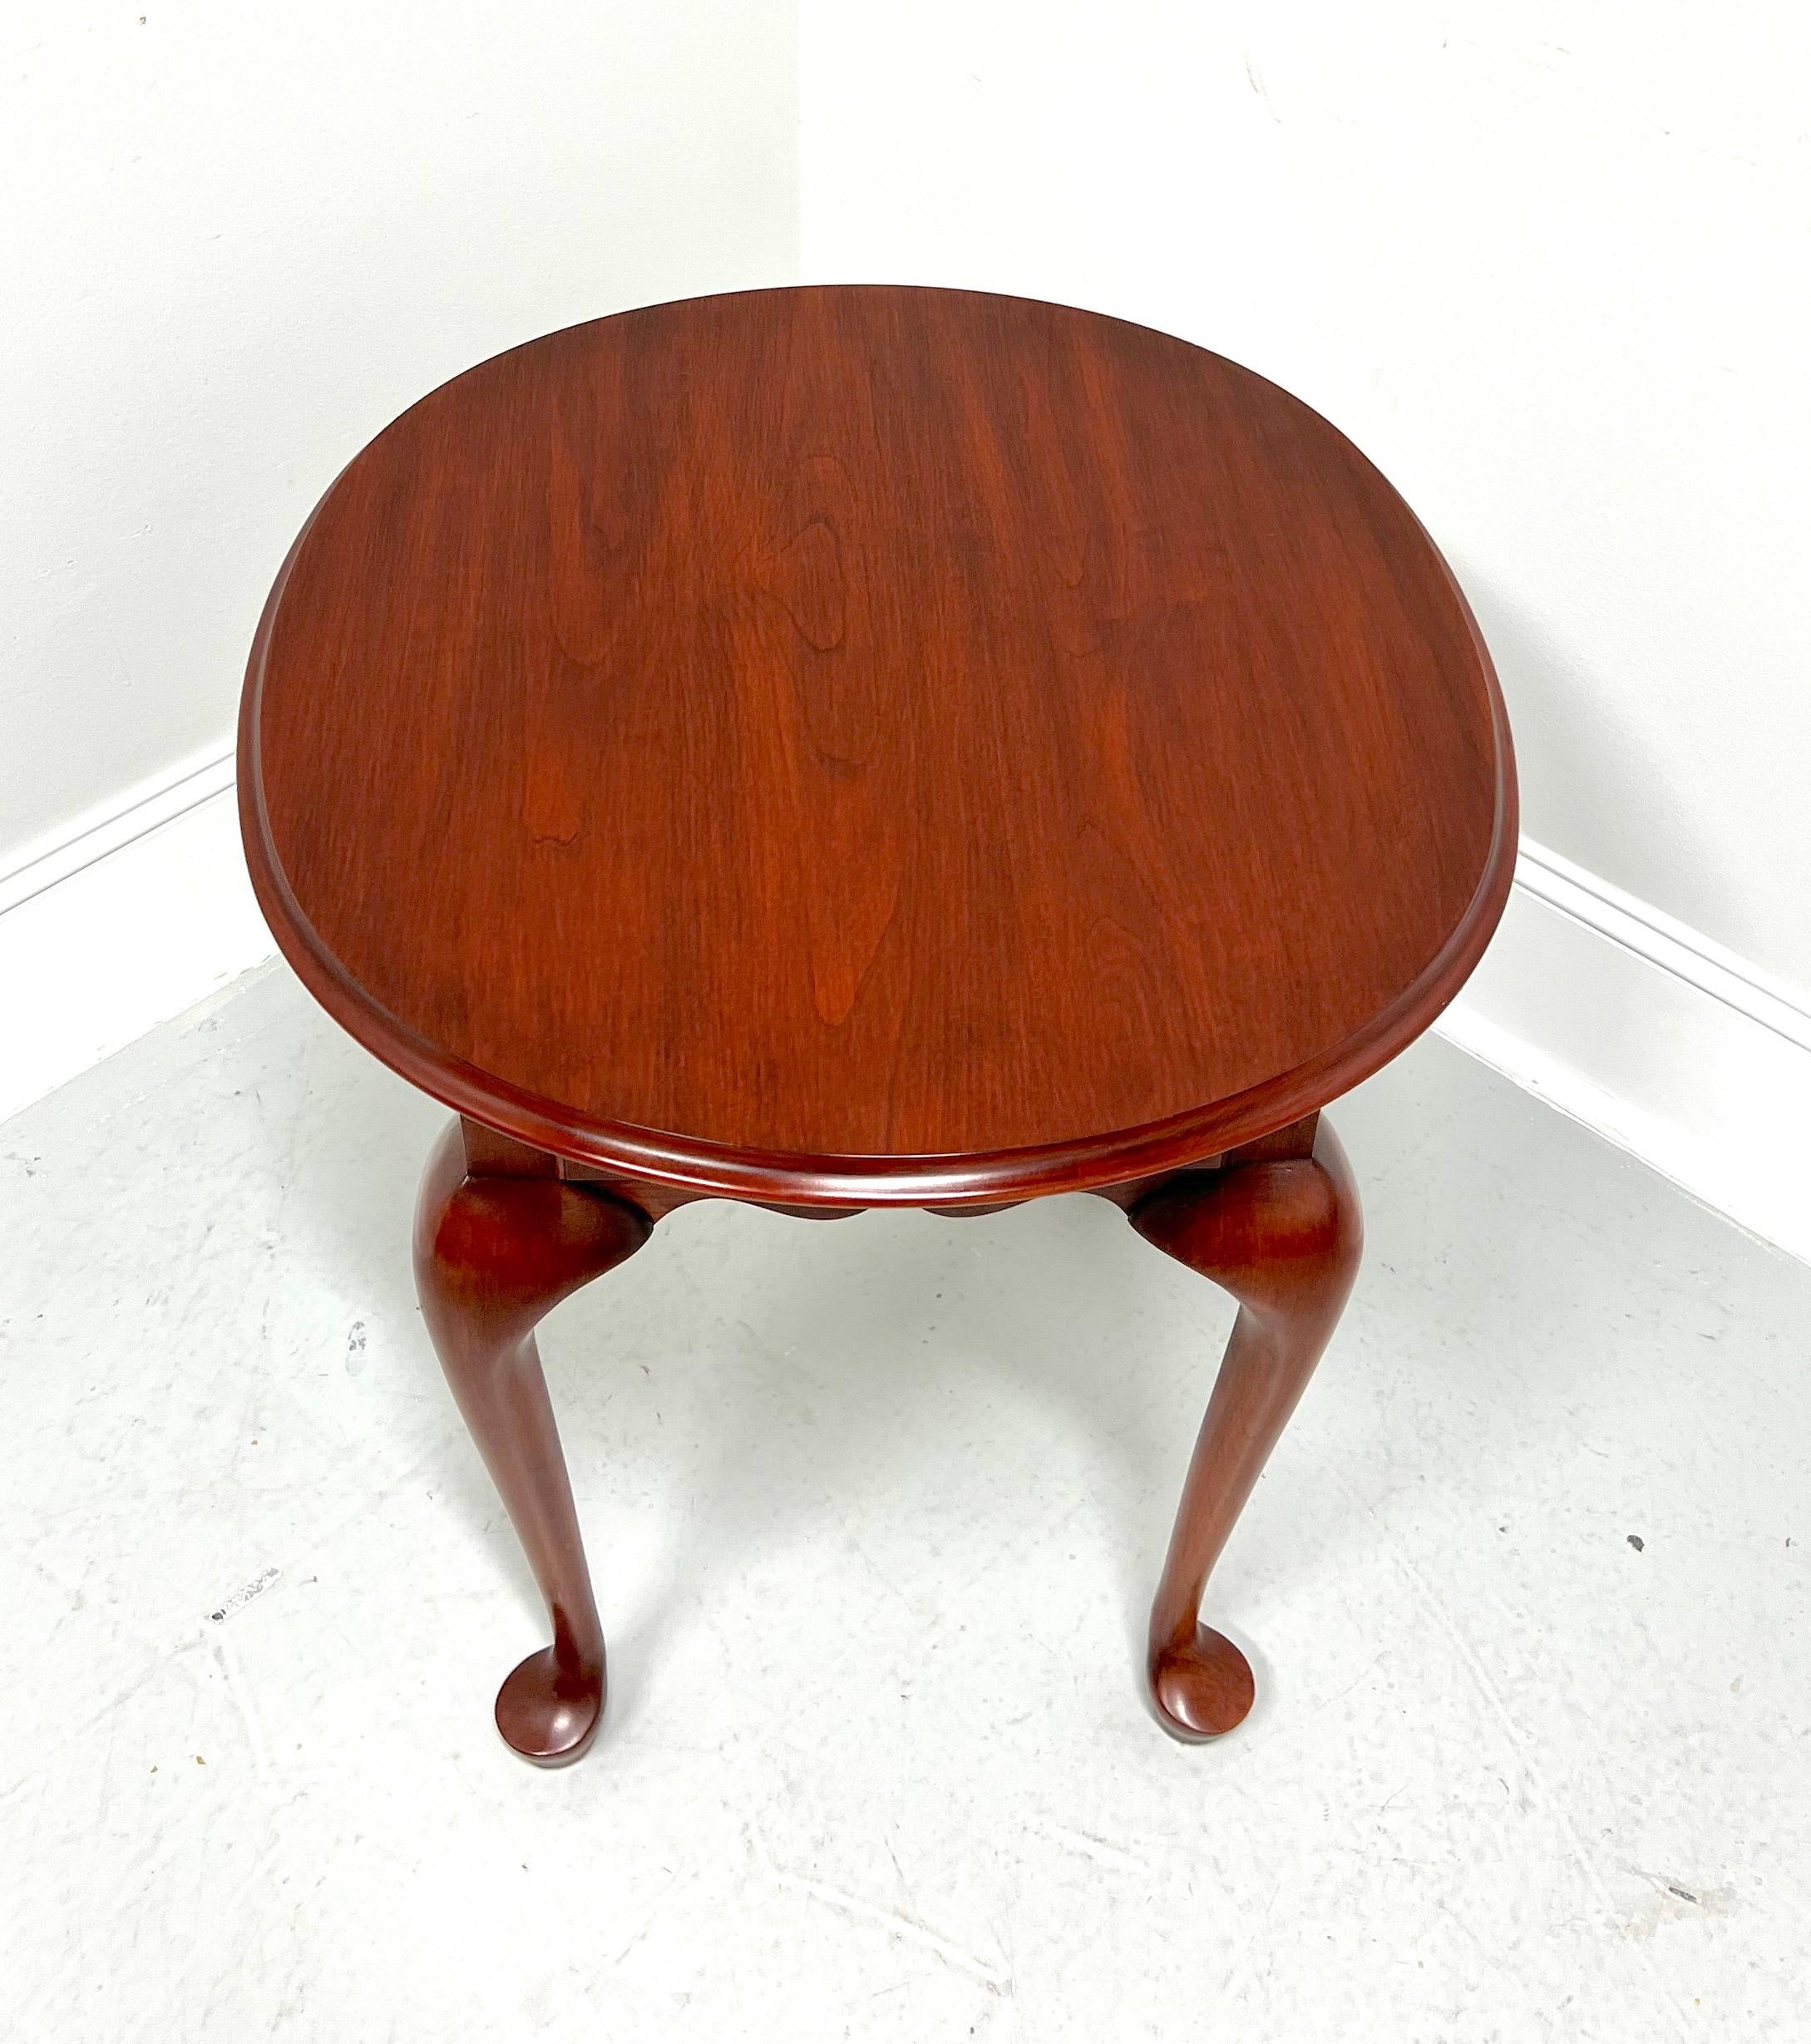 A Queen Anne style oval end side table by Henkel Harris, of Winchester, Virginia, USA. Solid wild black cherry wood with brass hardware, bevel edge to the top, carved apron, cabriole legs, and pad feet. Features one drawer of dovetail construction.